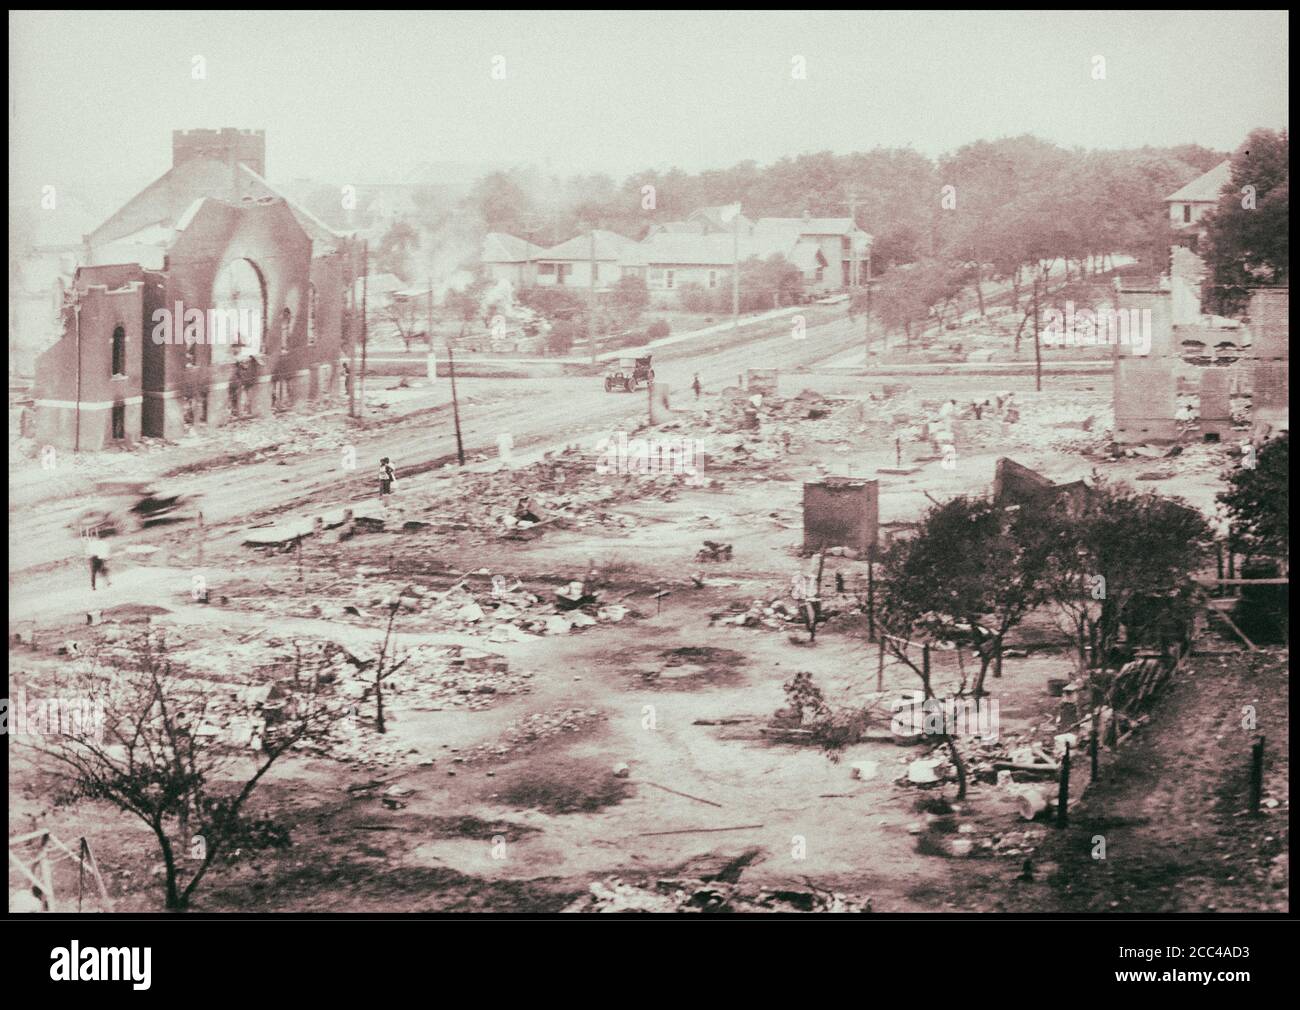 Part of district burned in race riots, Tulsa, Oklahoma. USA. June 1921 Stock Photo